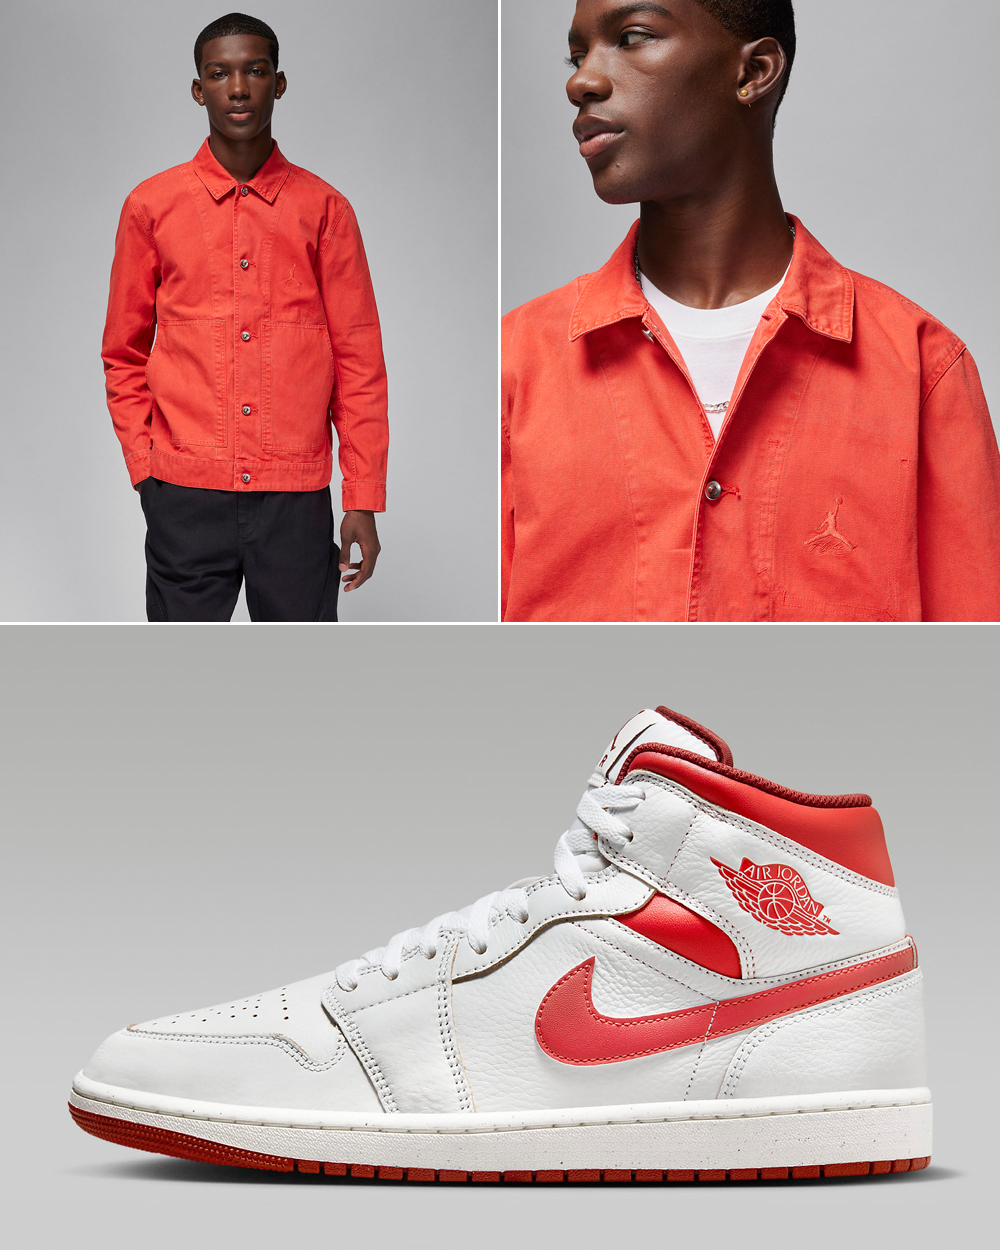 Air-Jordan-1-Mid-SE-White-Dune-Red-Lobster-Jacket-Matching-Outfit